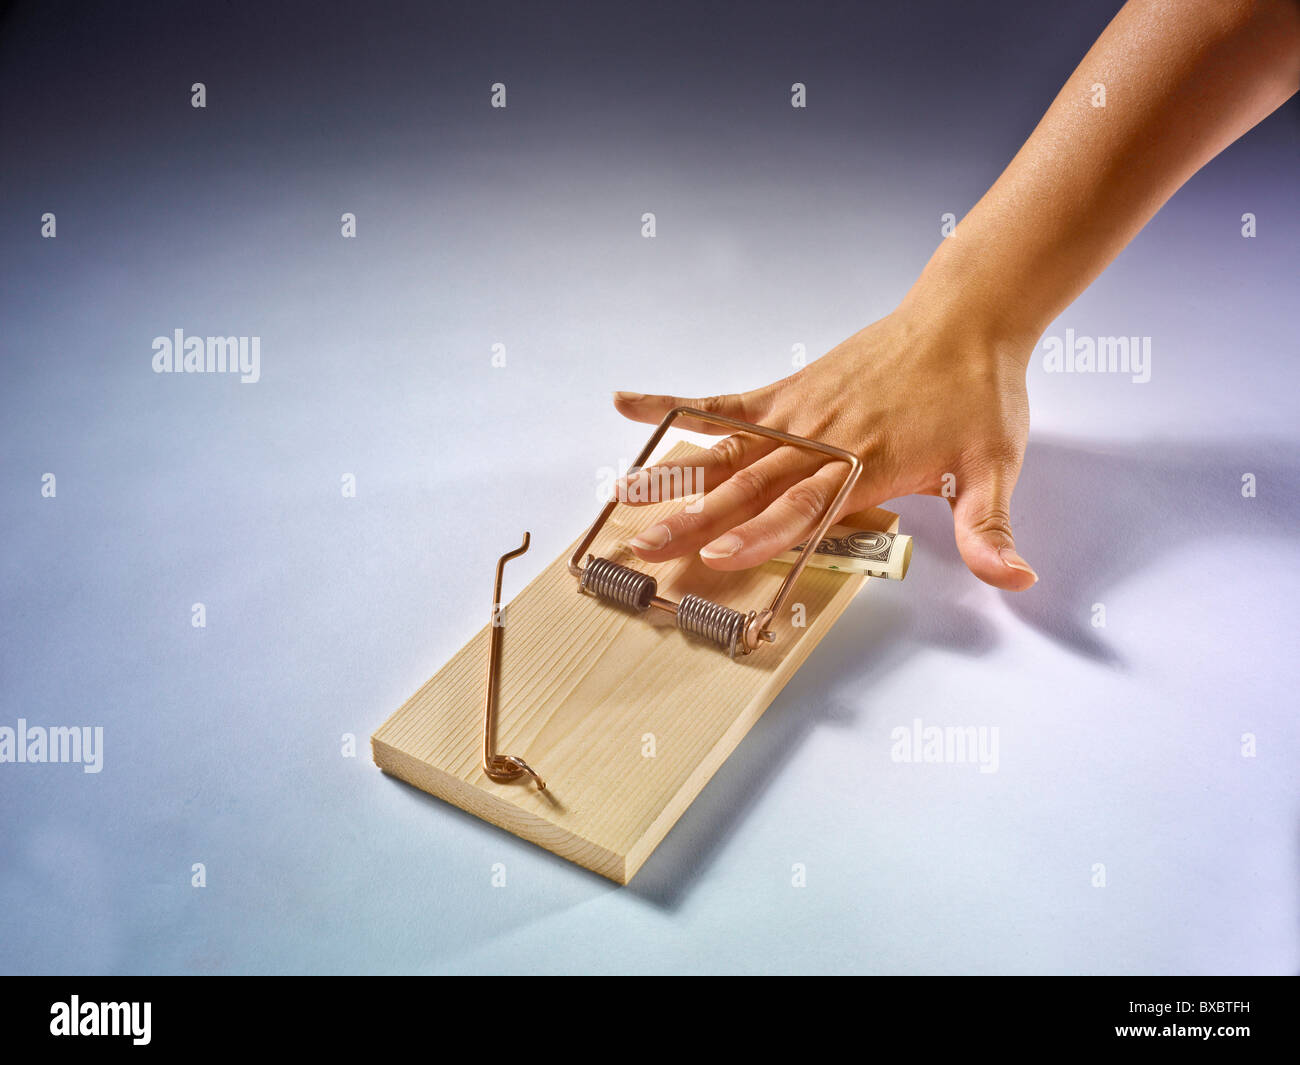 https://c8.alamy.com/comp/BXBTFH/hand-caught-restrained-removing-money-from-large-mouse-trap-BXBTFH.jpg